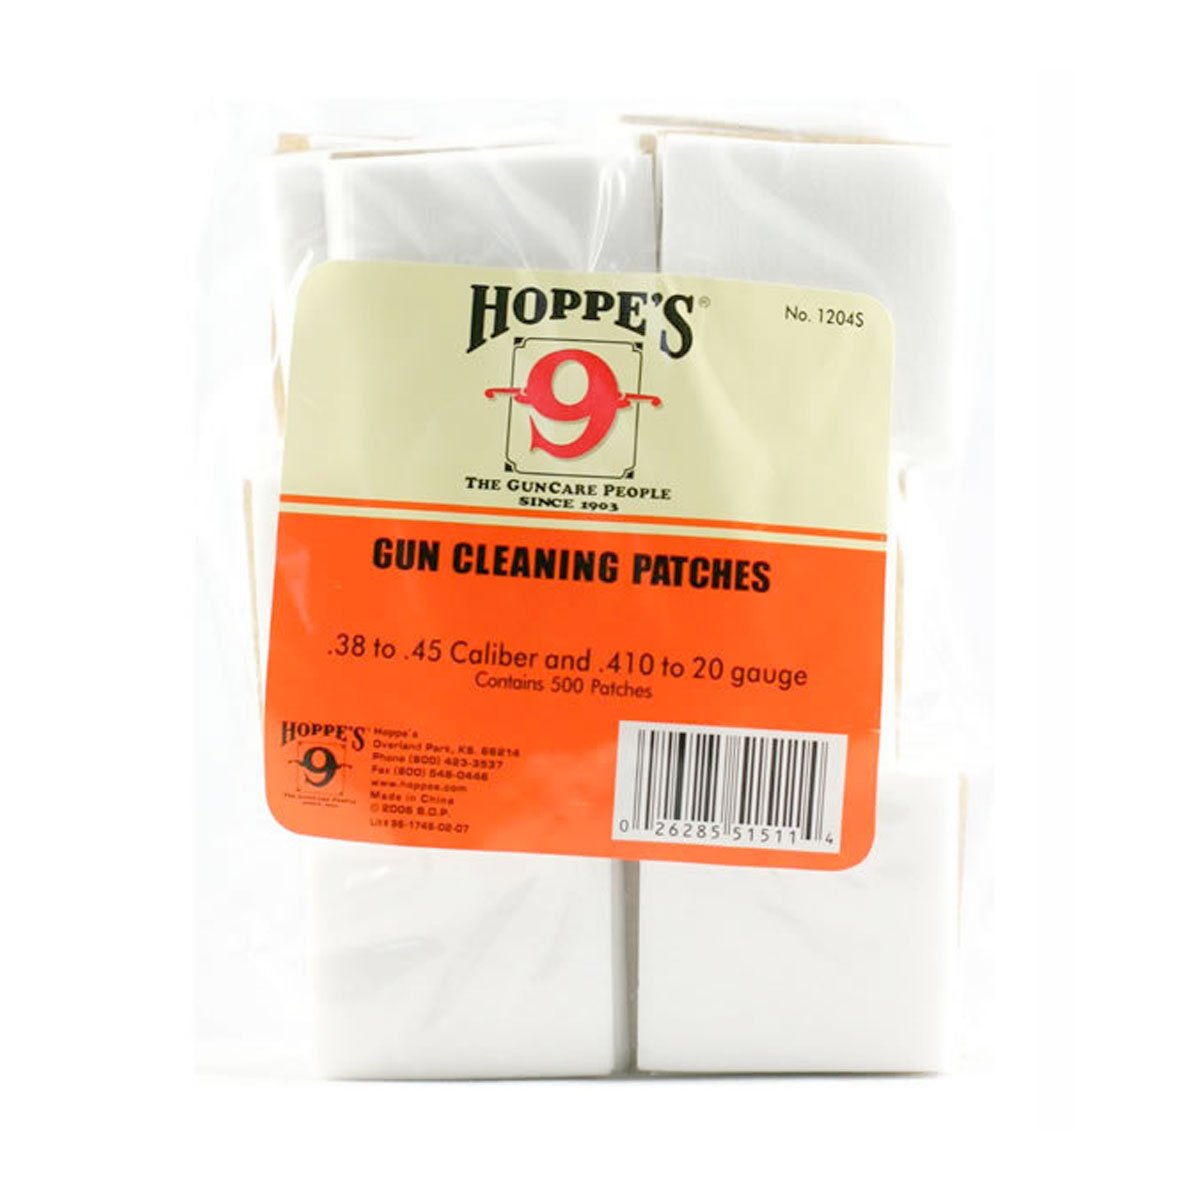 Hoppe's Gun Cleaning Patches for .22 to .270 / .38 to .45 caliber and .410 to 20 gauge Pack of 500 Accessories Hoppe's Guncare .22 to .270 Tactical Gear Supplier Tactical Distributors Australia